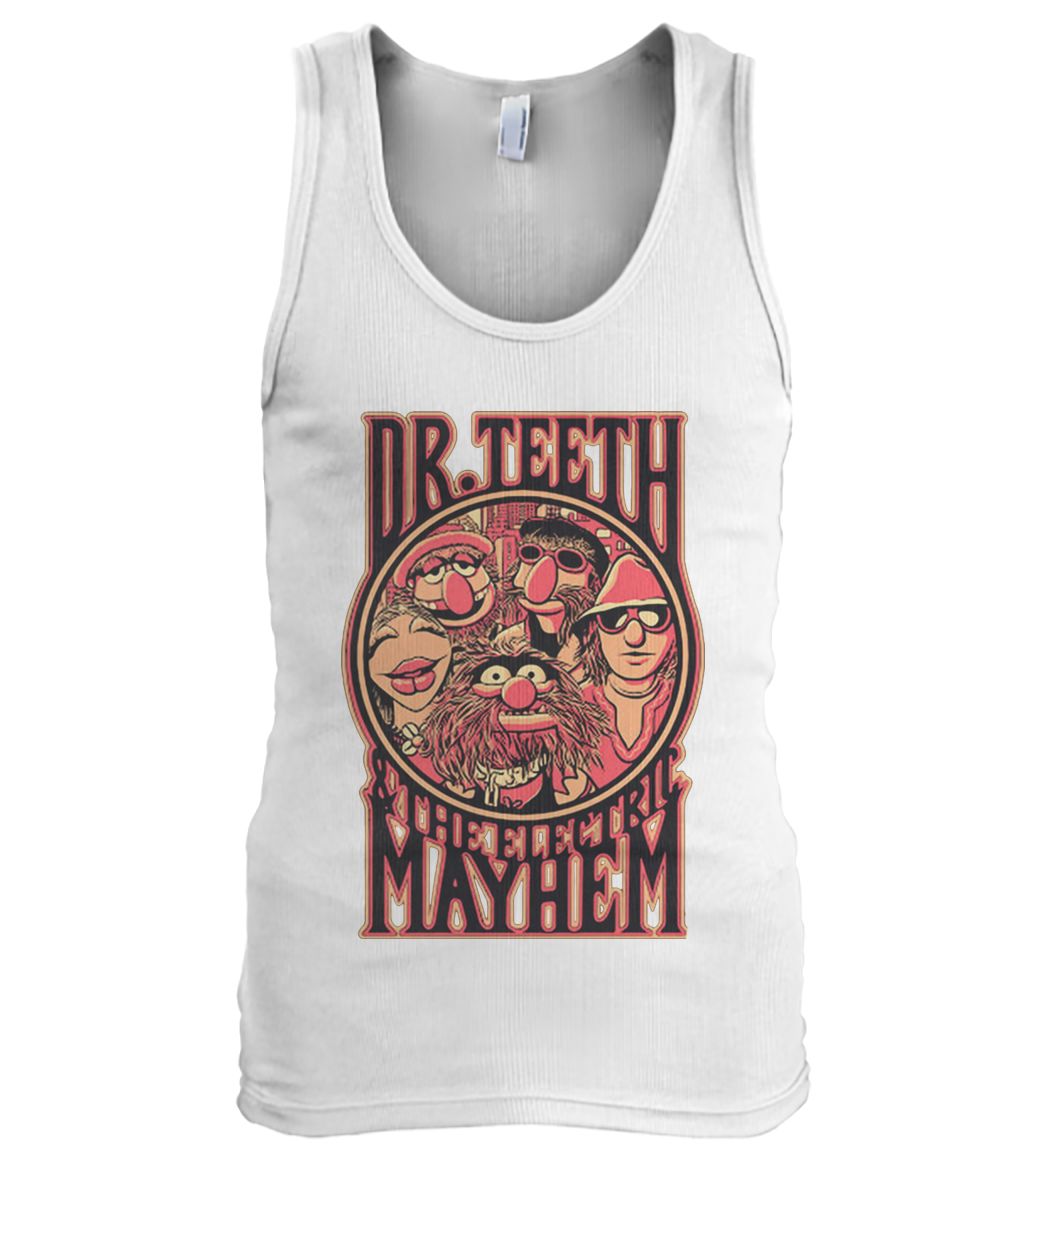 Muppets show dr. teeth and the electric mayhem men's tank top